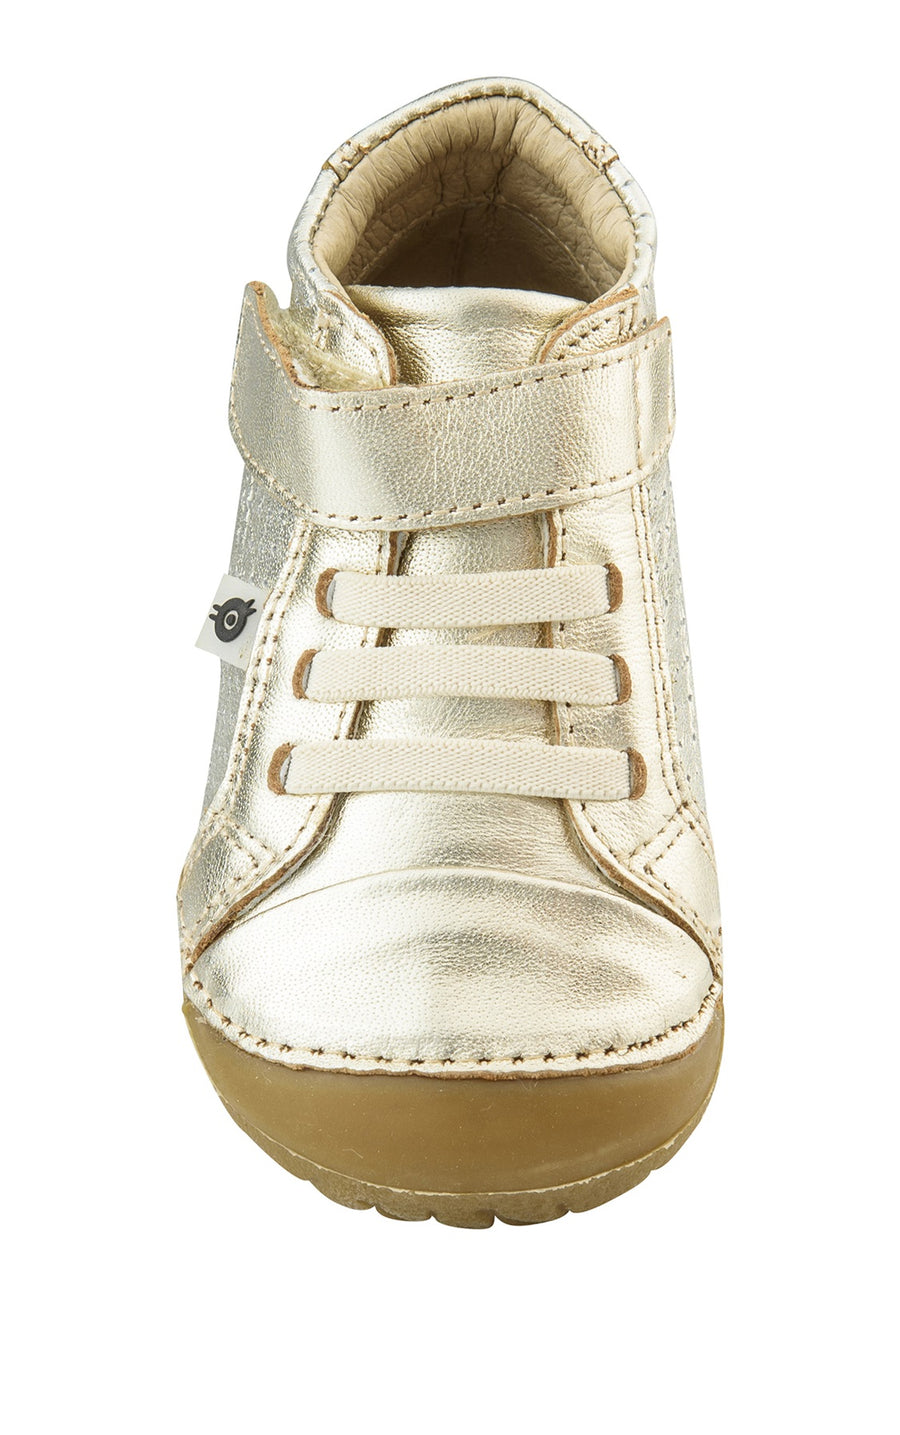 Old Soles Boy's and Girl's Pave Cheer Gold Leather High Top Elastic Hook and Loop Walker Baby Shoe Sneaker